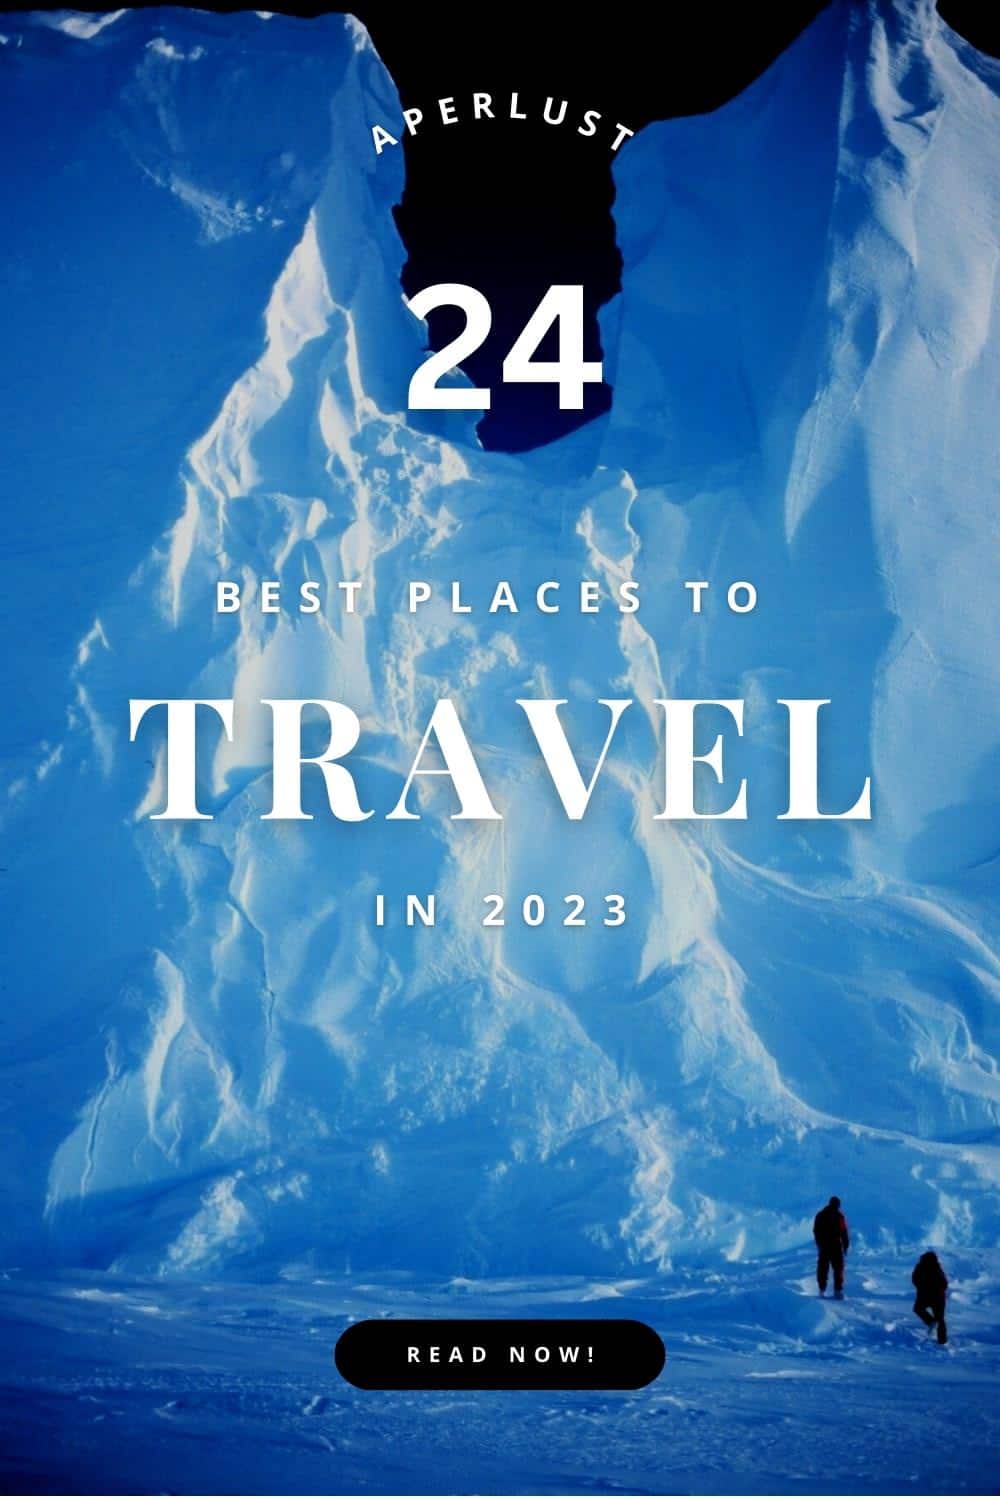 Two men in Antarctica in front of snow mountain - 24 best places to travel in 2023